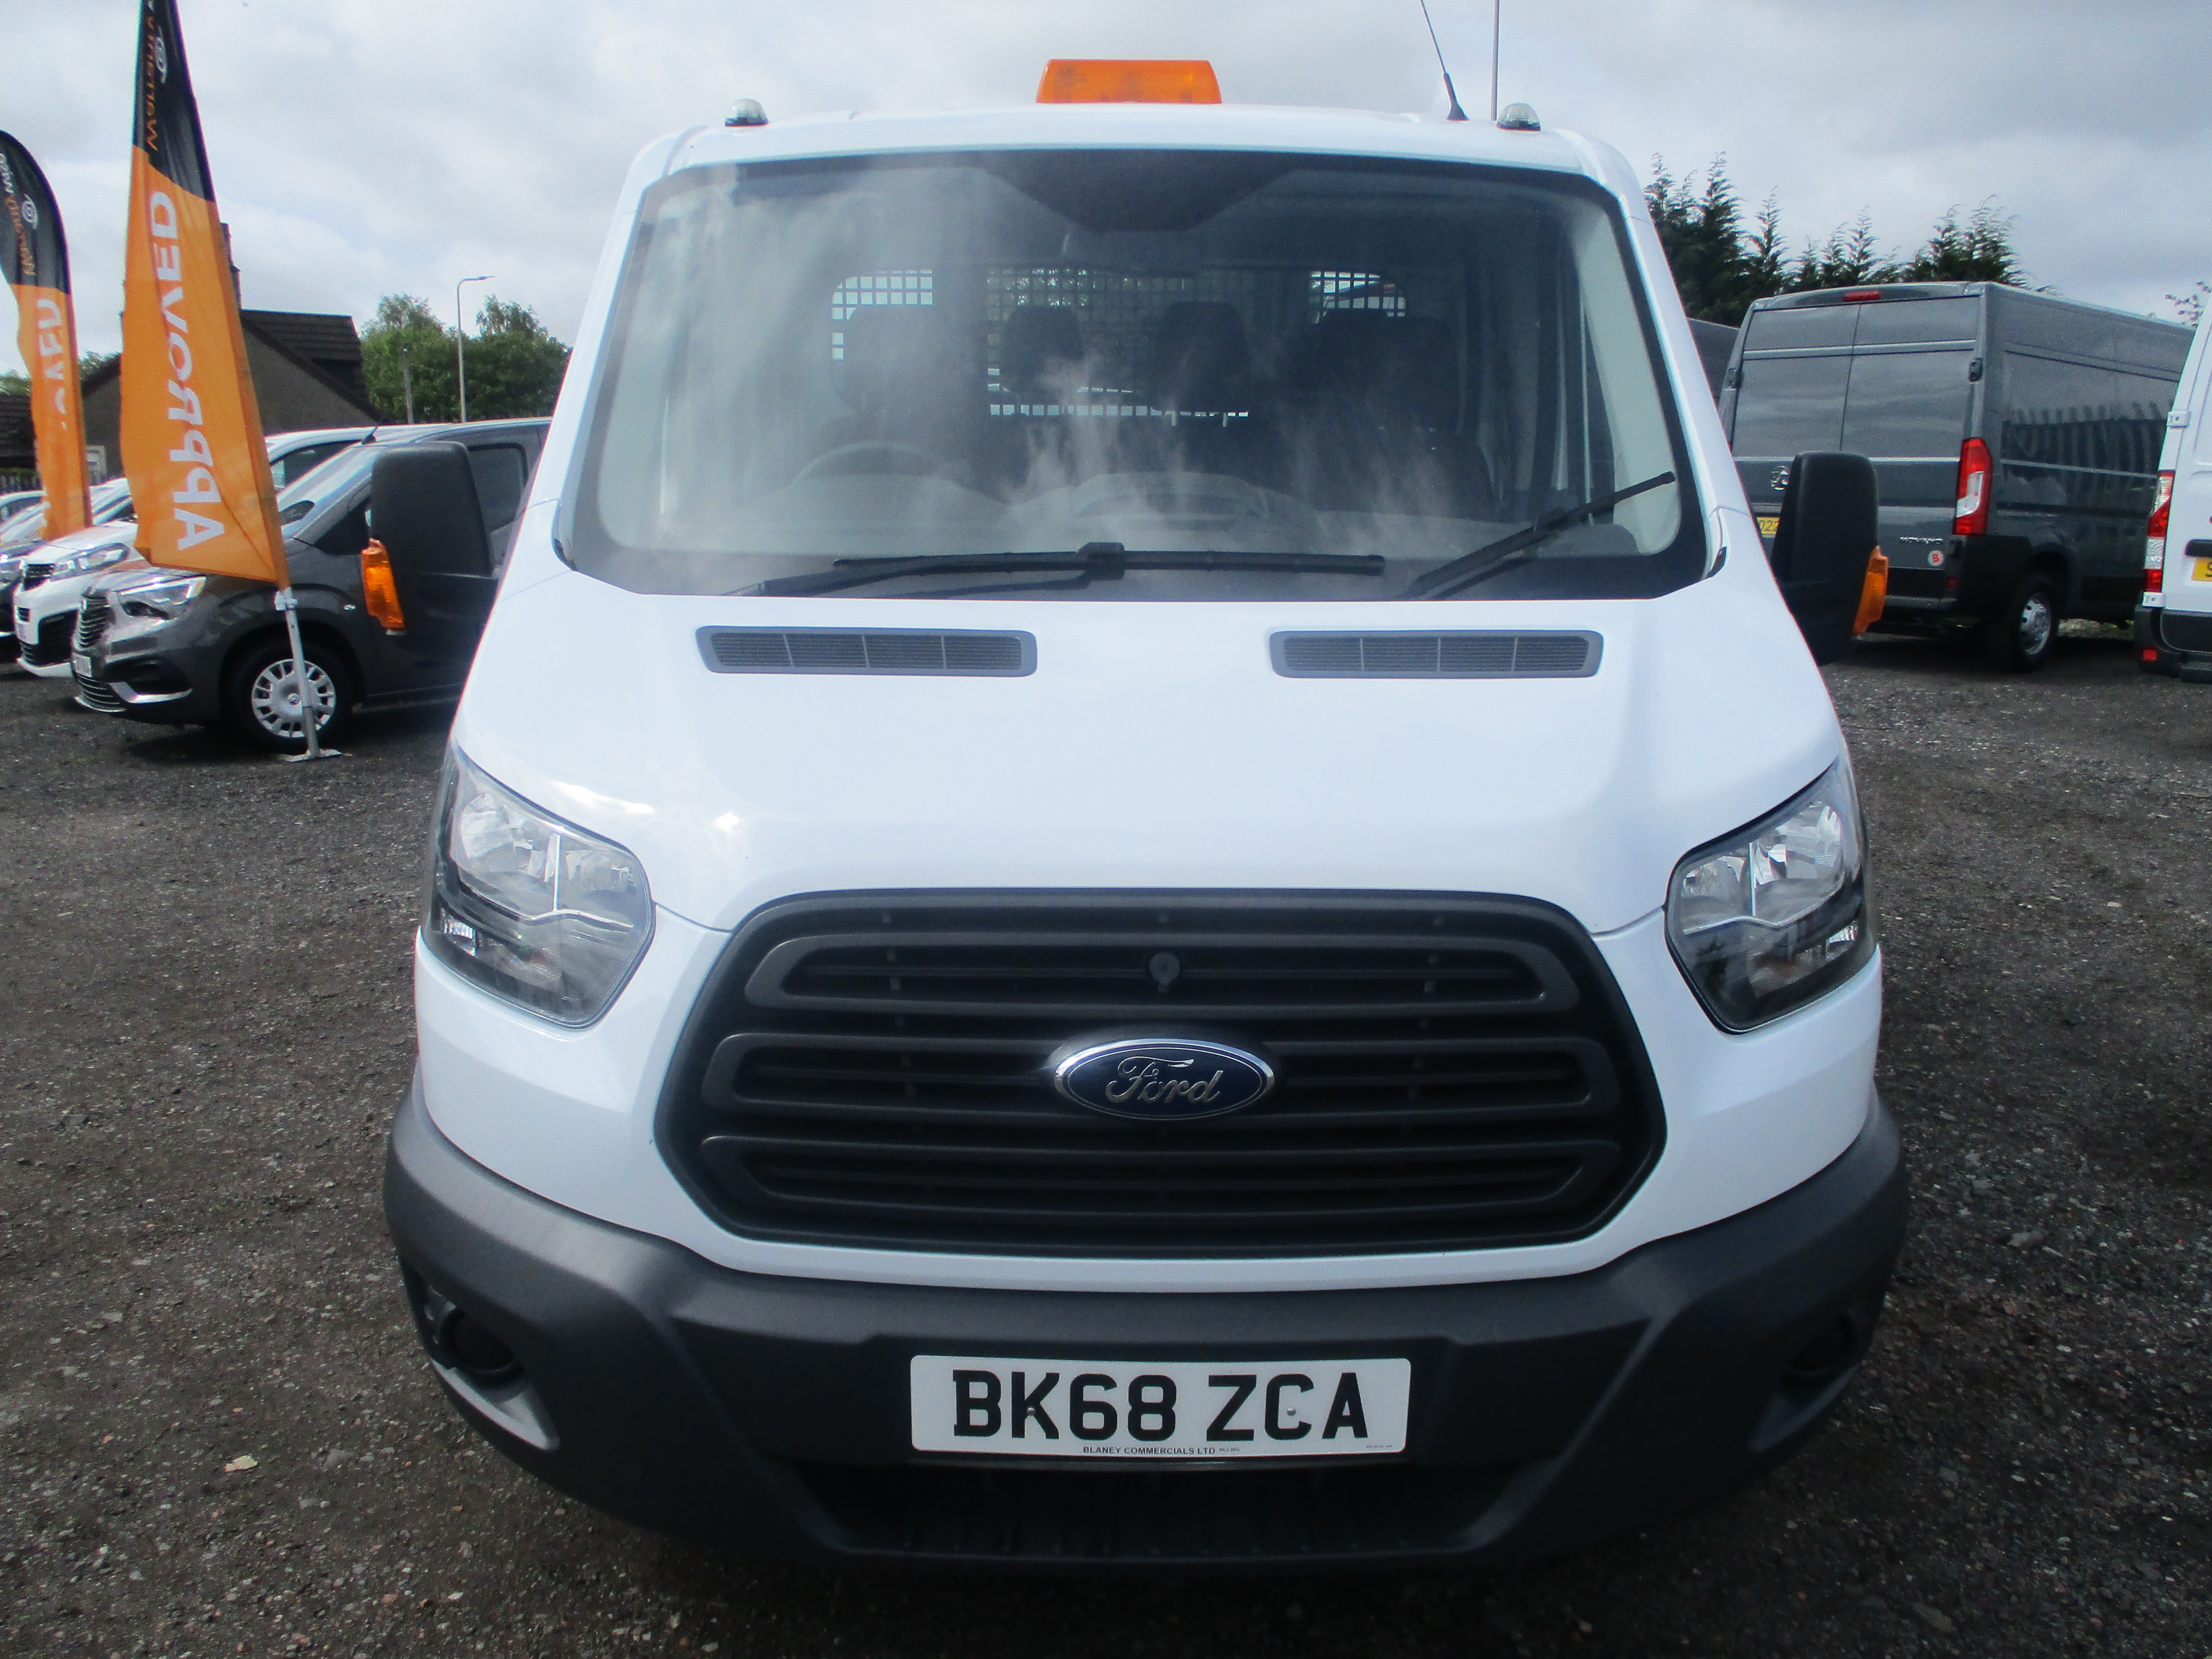 Ford Transit 350 2.0TDCI 130PS Double Cab Tipper